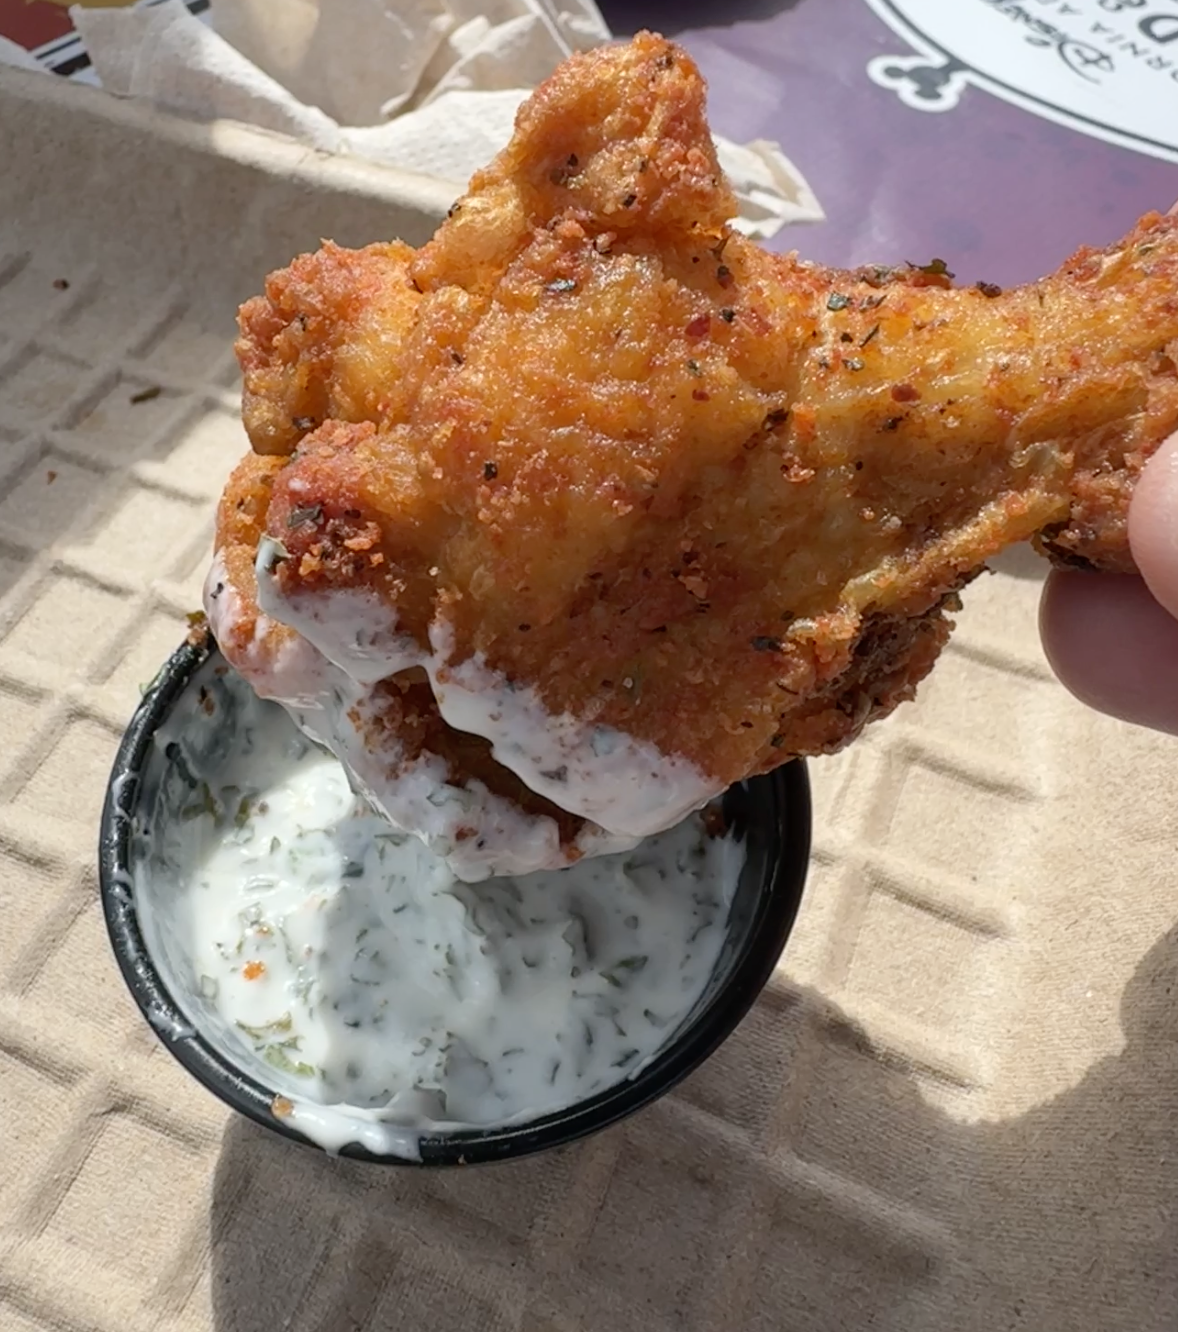 A hand dipping a piece of fried chicken into a cup of sauce, on a paper-lined plate